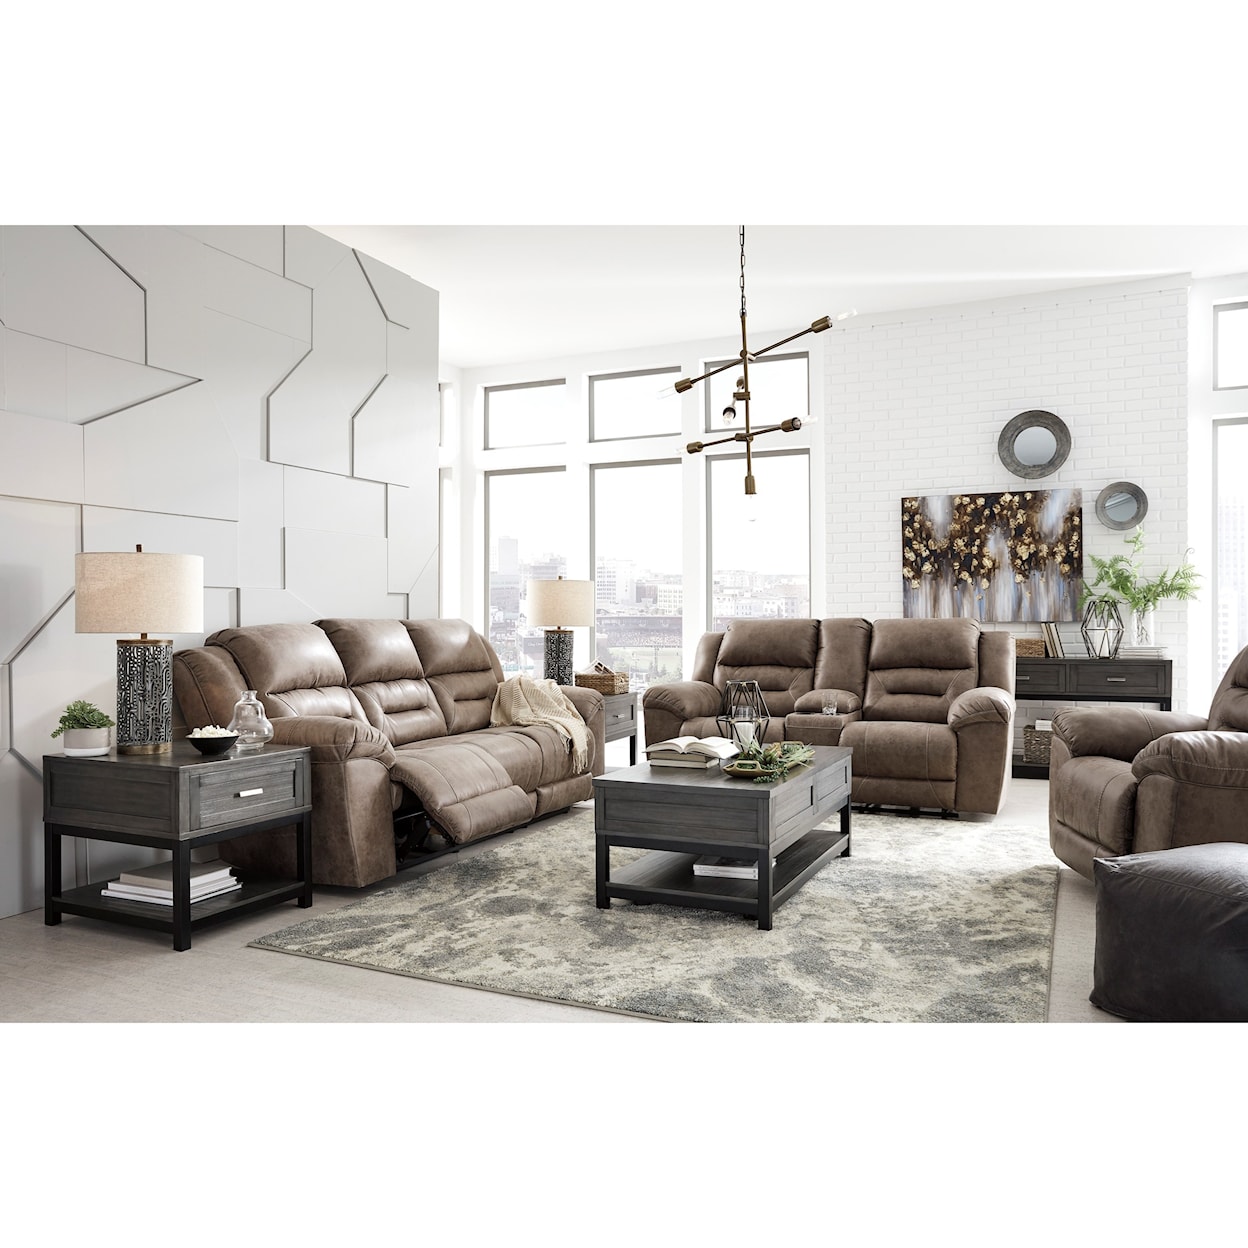 Benchcraft Stoneland Reclining Living Room Group